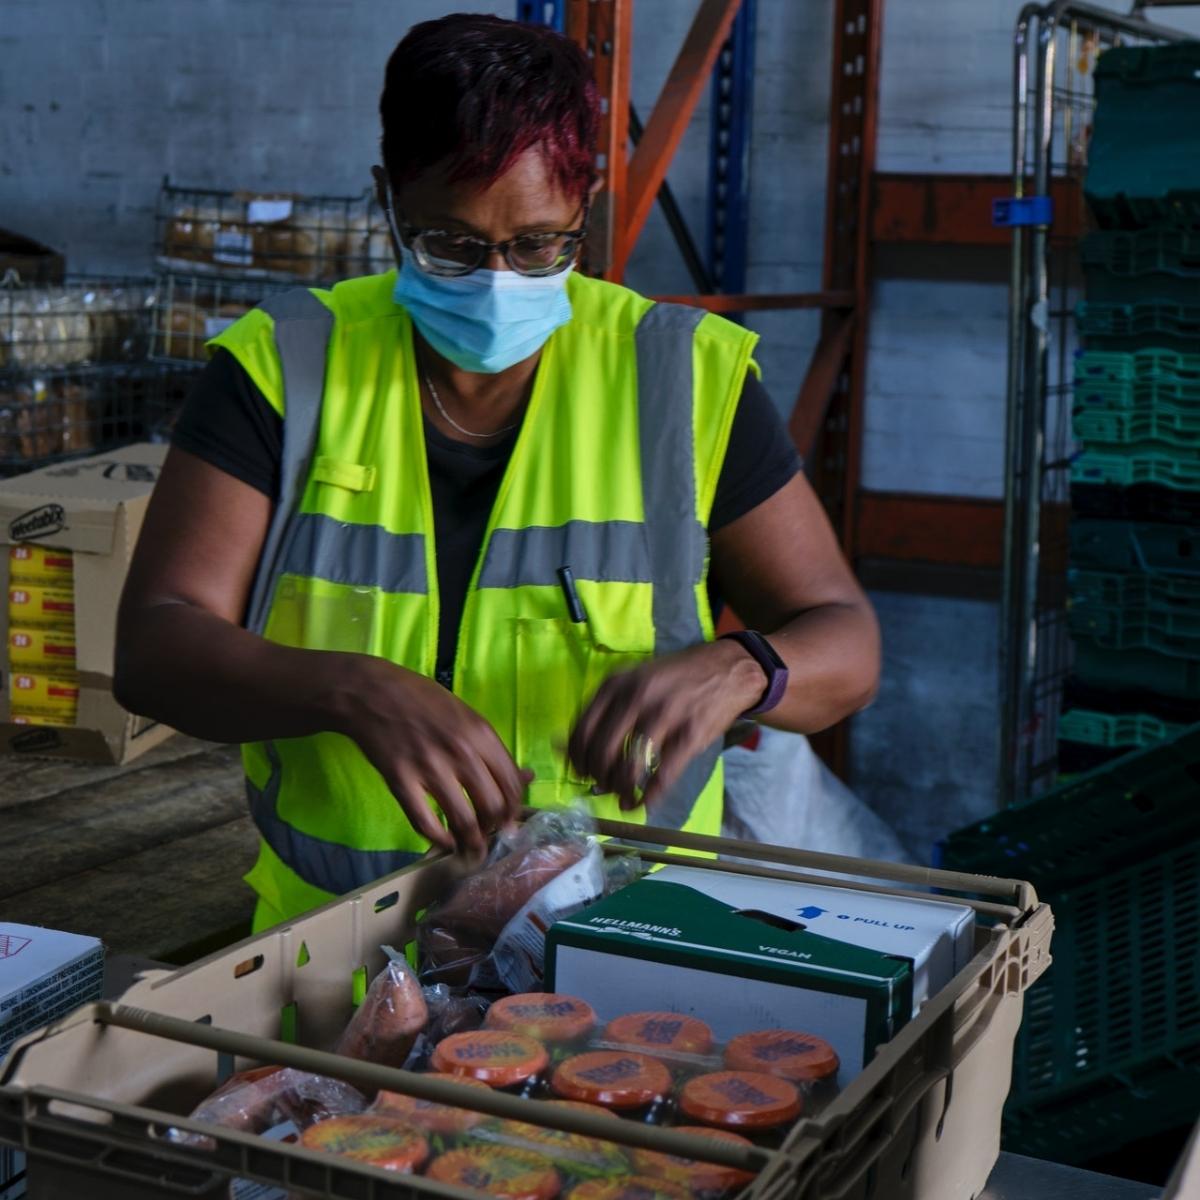 A dark-skinned woman with short, red hair wears a blue medical mask and a yellow and grey industrial vest as she packs boxes of food in an industrial setting.